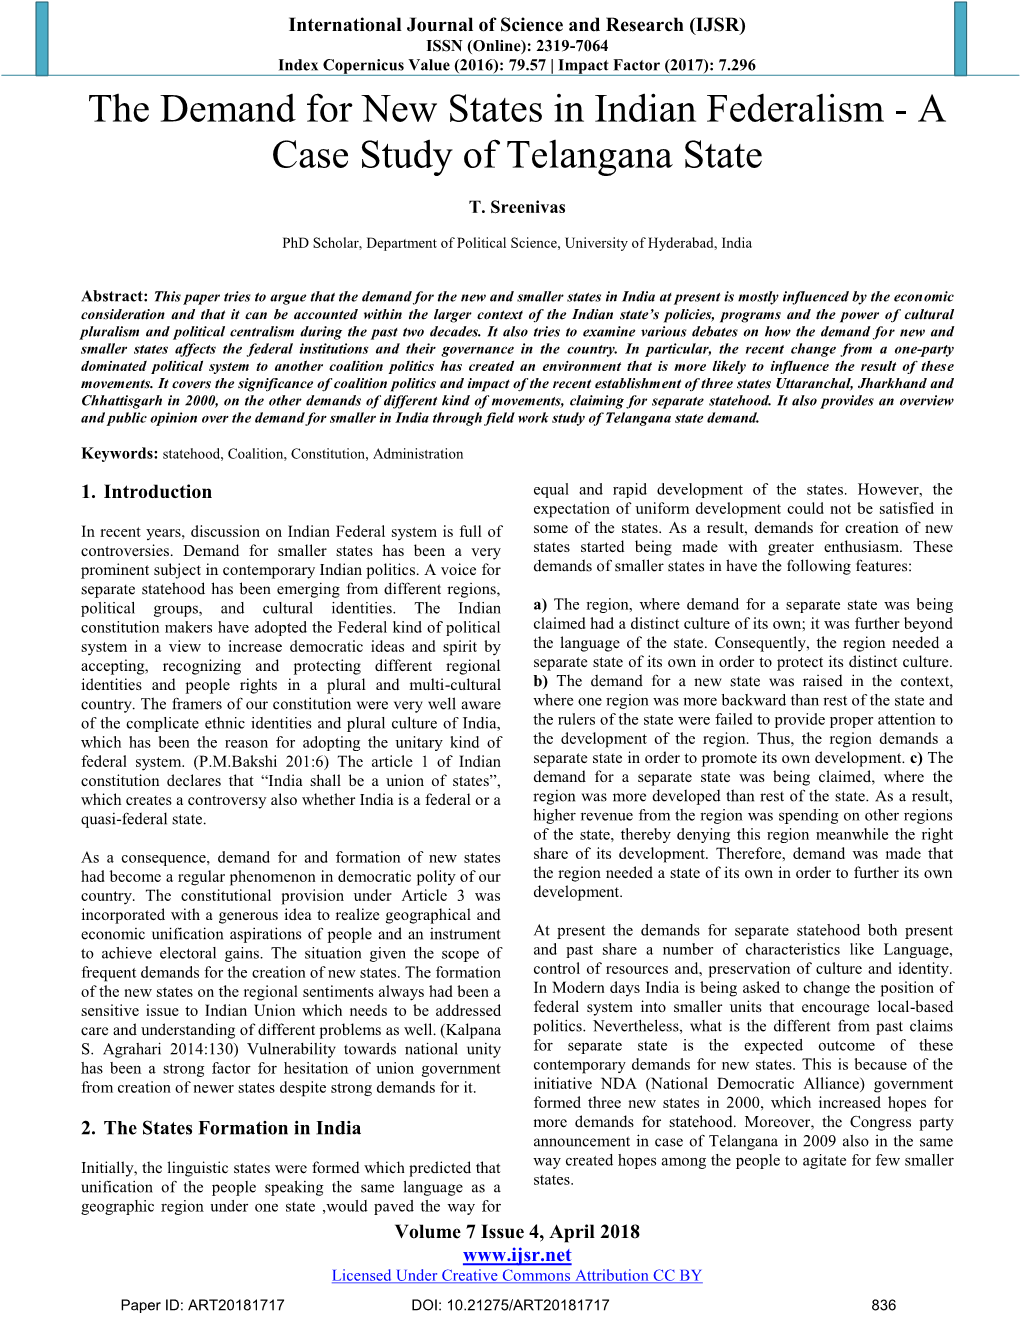 The Demand for New States in Indian Federalism - a Case Study of Telangana State